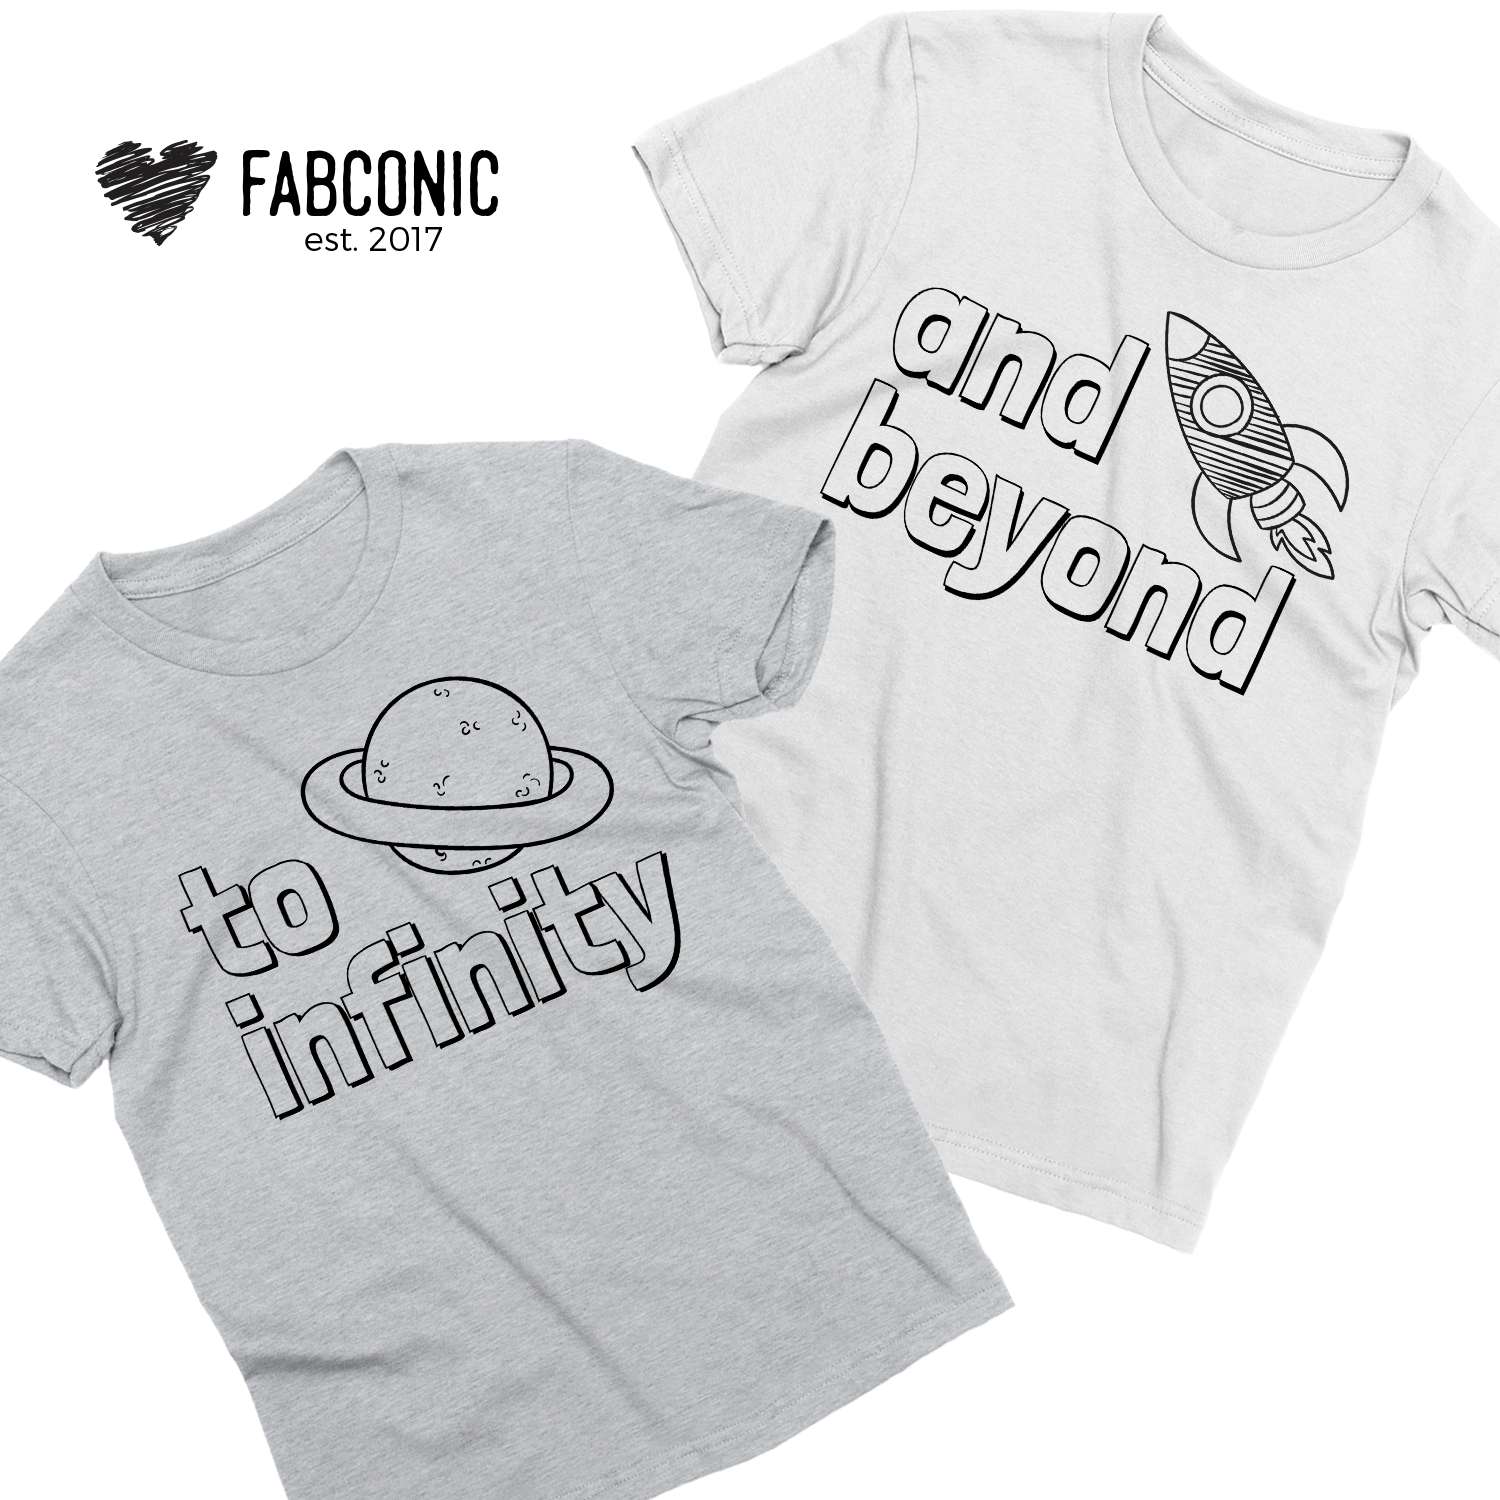 To Infinity and Beyond, Couple Shirts, Matching Shirts, Couples G...